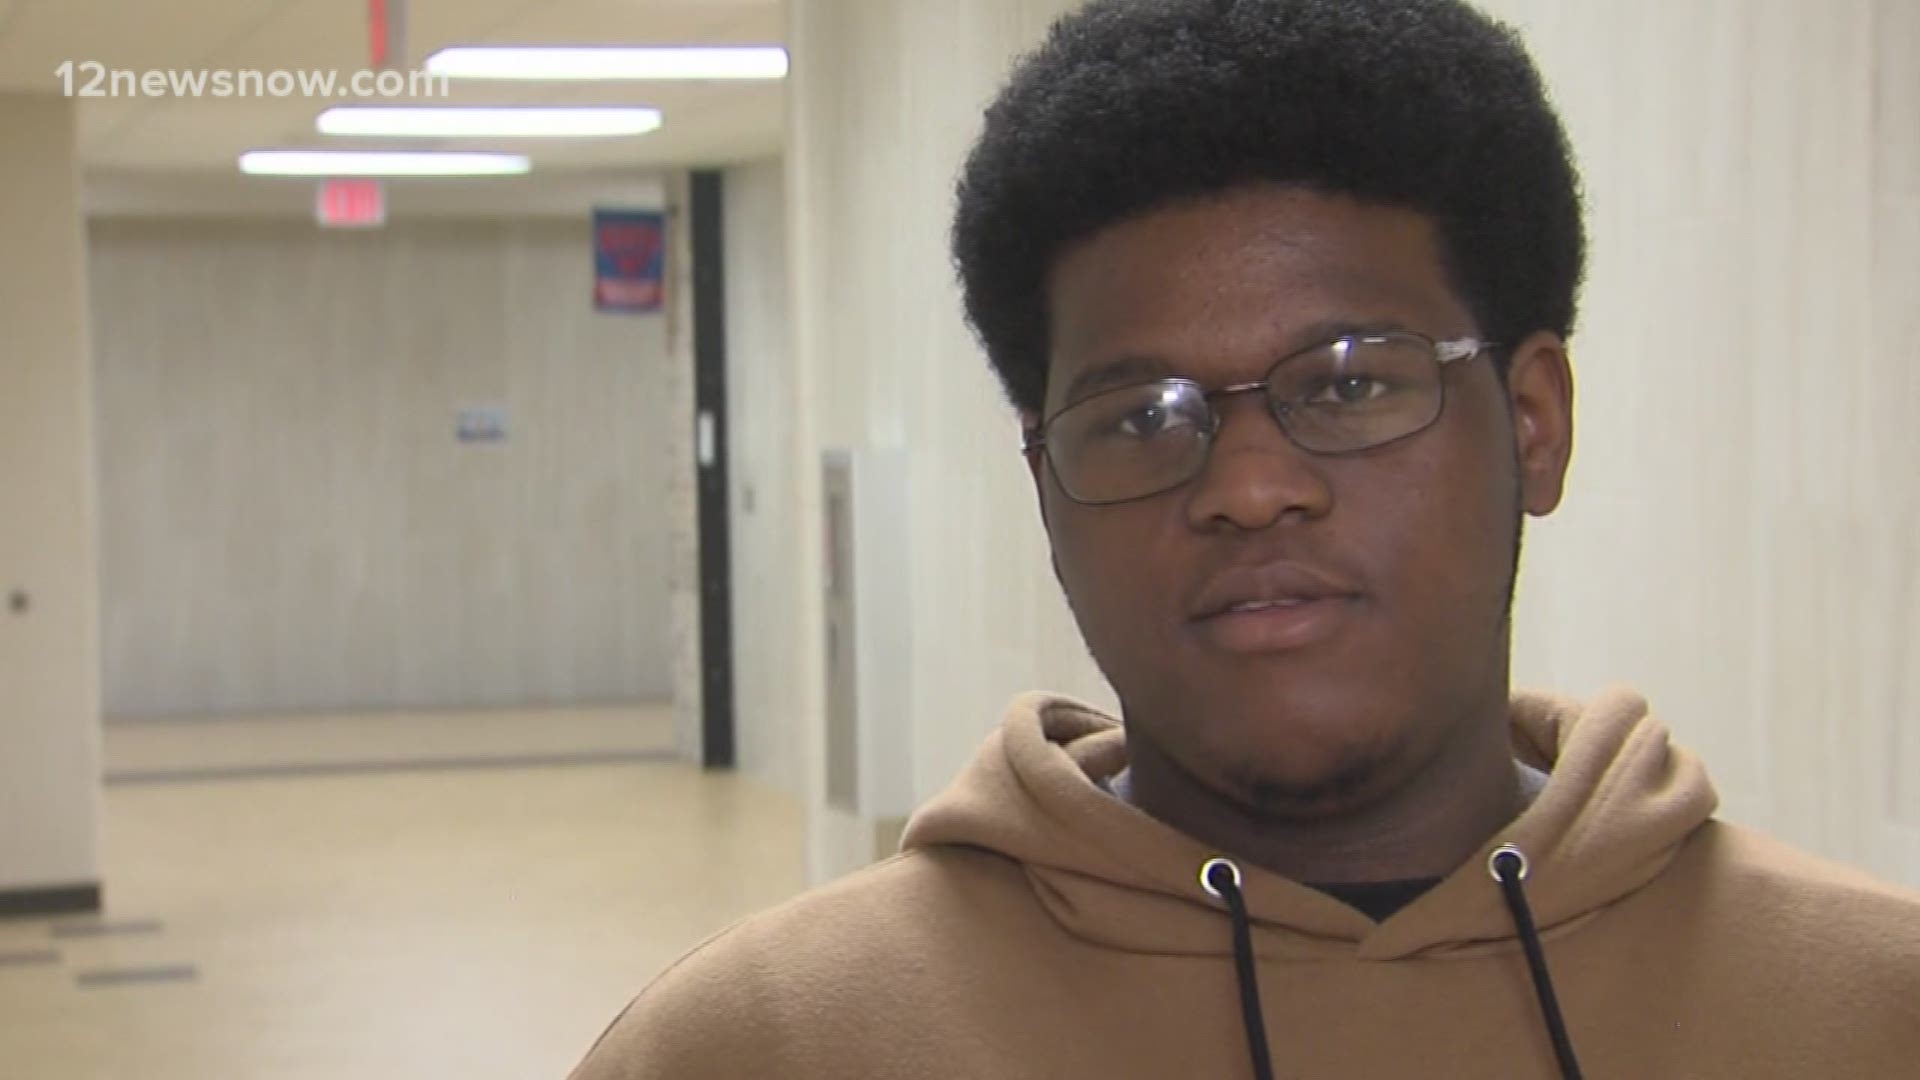 Dajhaun Myles plans to join the Air Force to do computer systems programming.